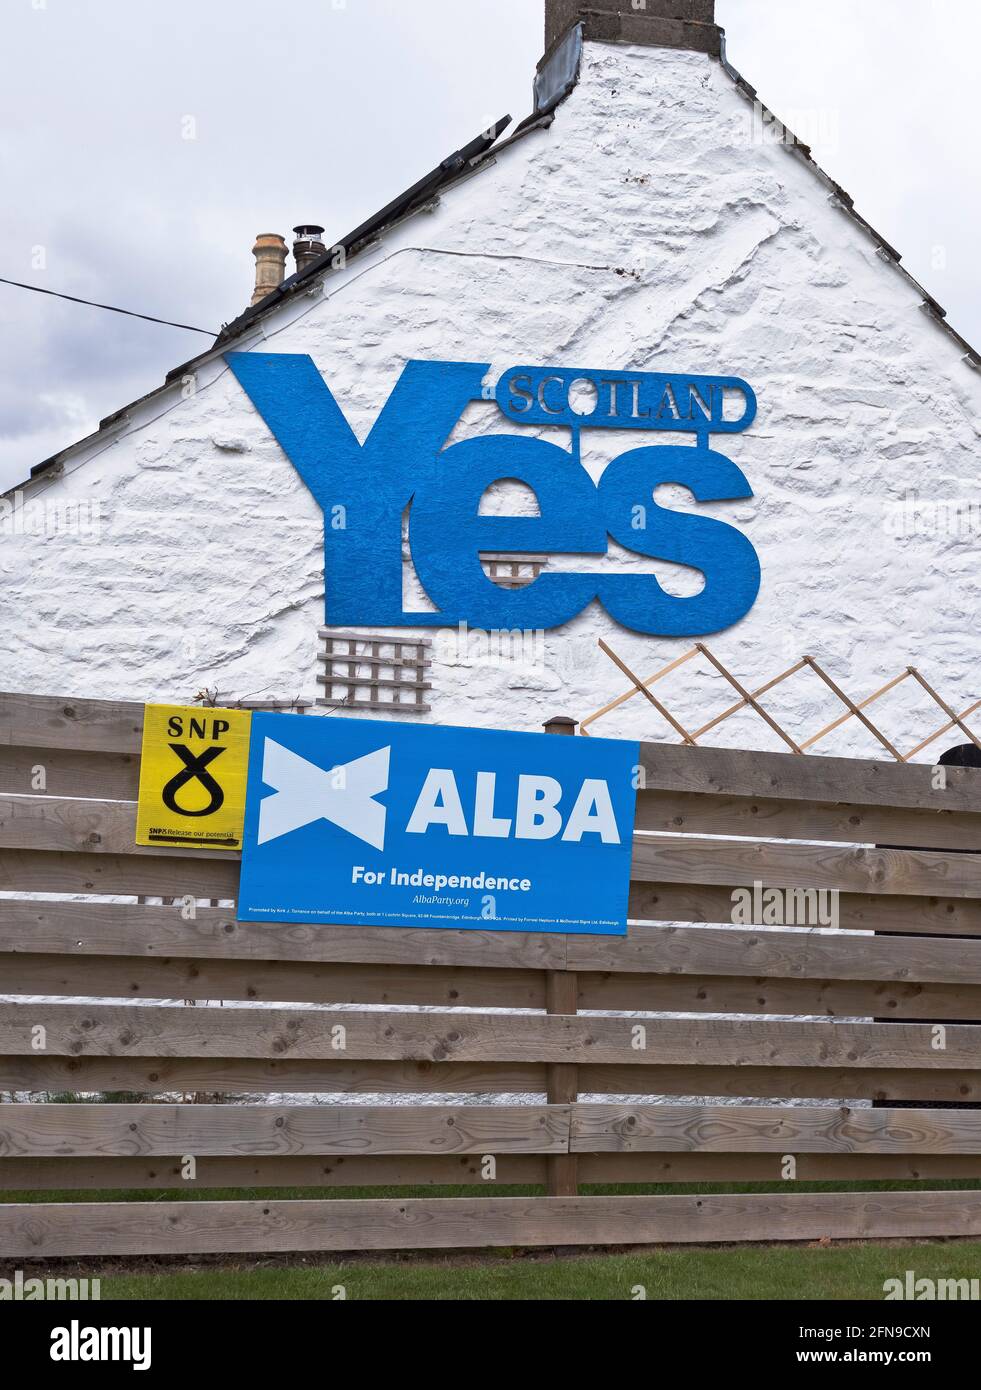 dh Scottish independence SCOTLAND UK Scottish YES supporters house referendum supporter houses campaign support signs SNP logo Alba sign politics Stock Photo